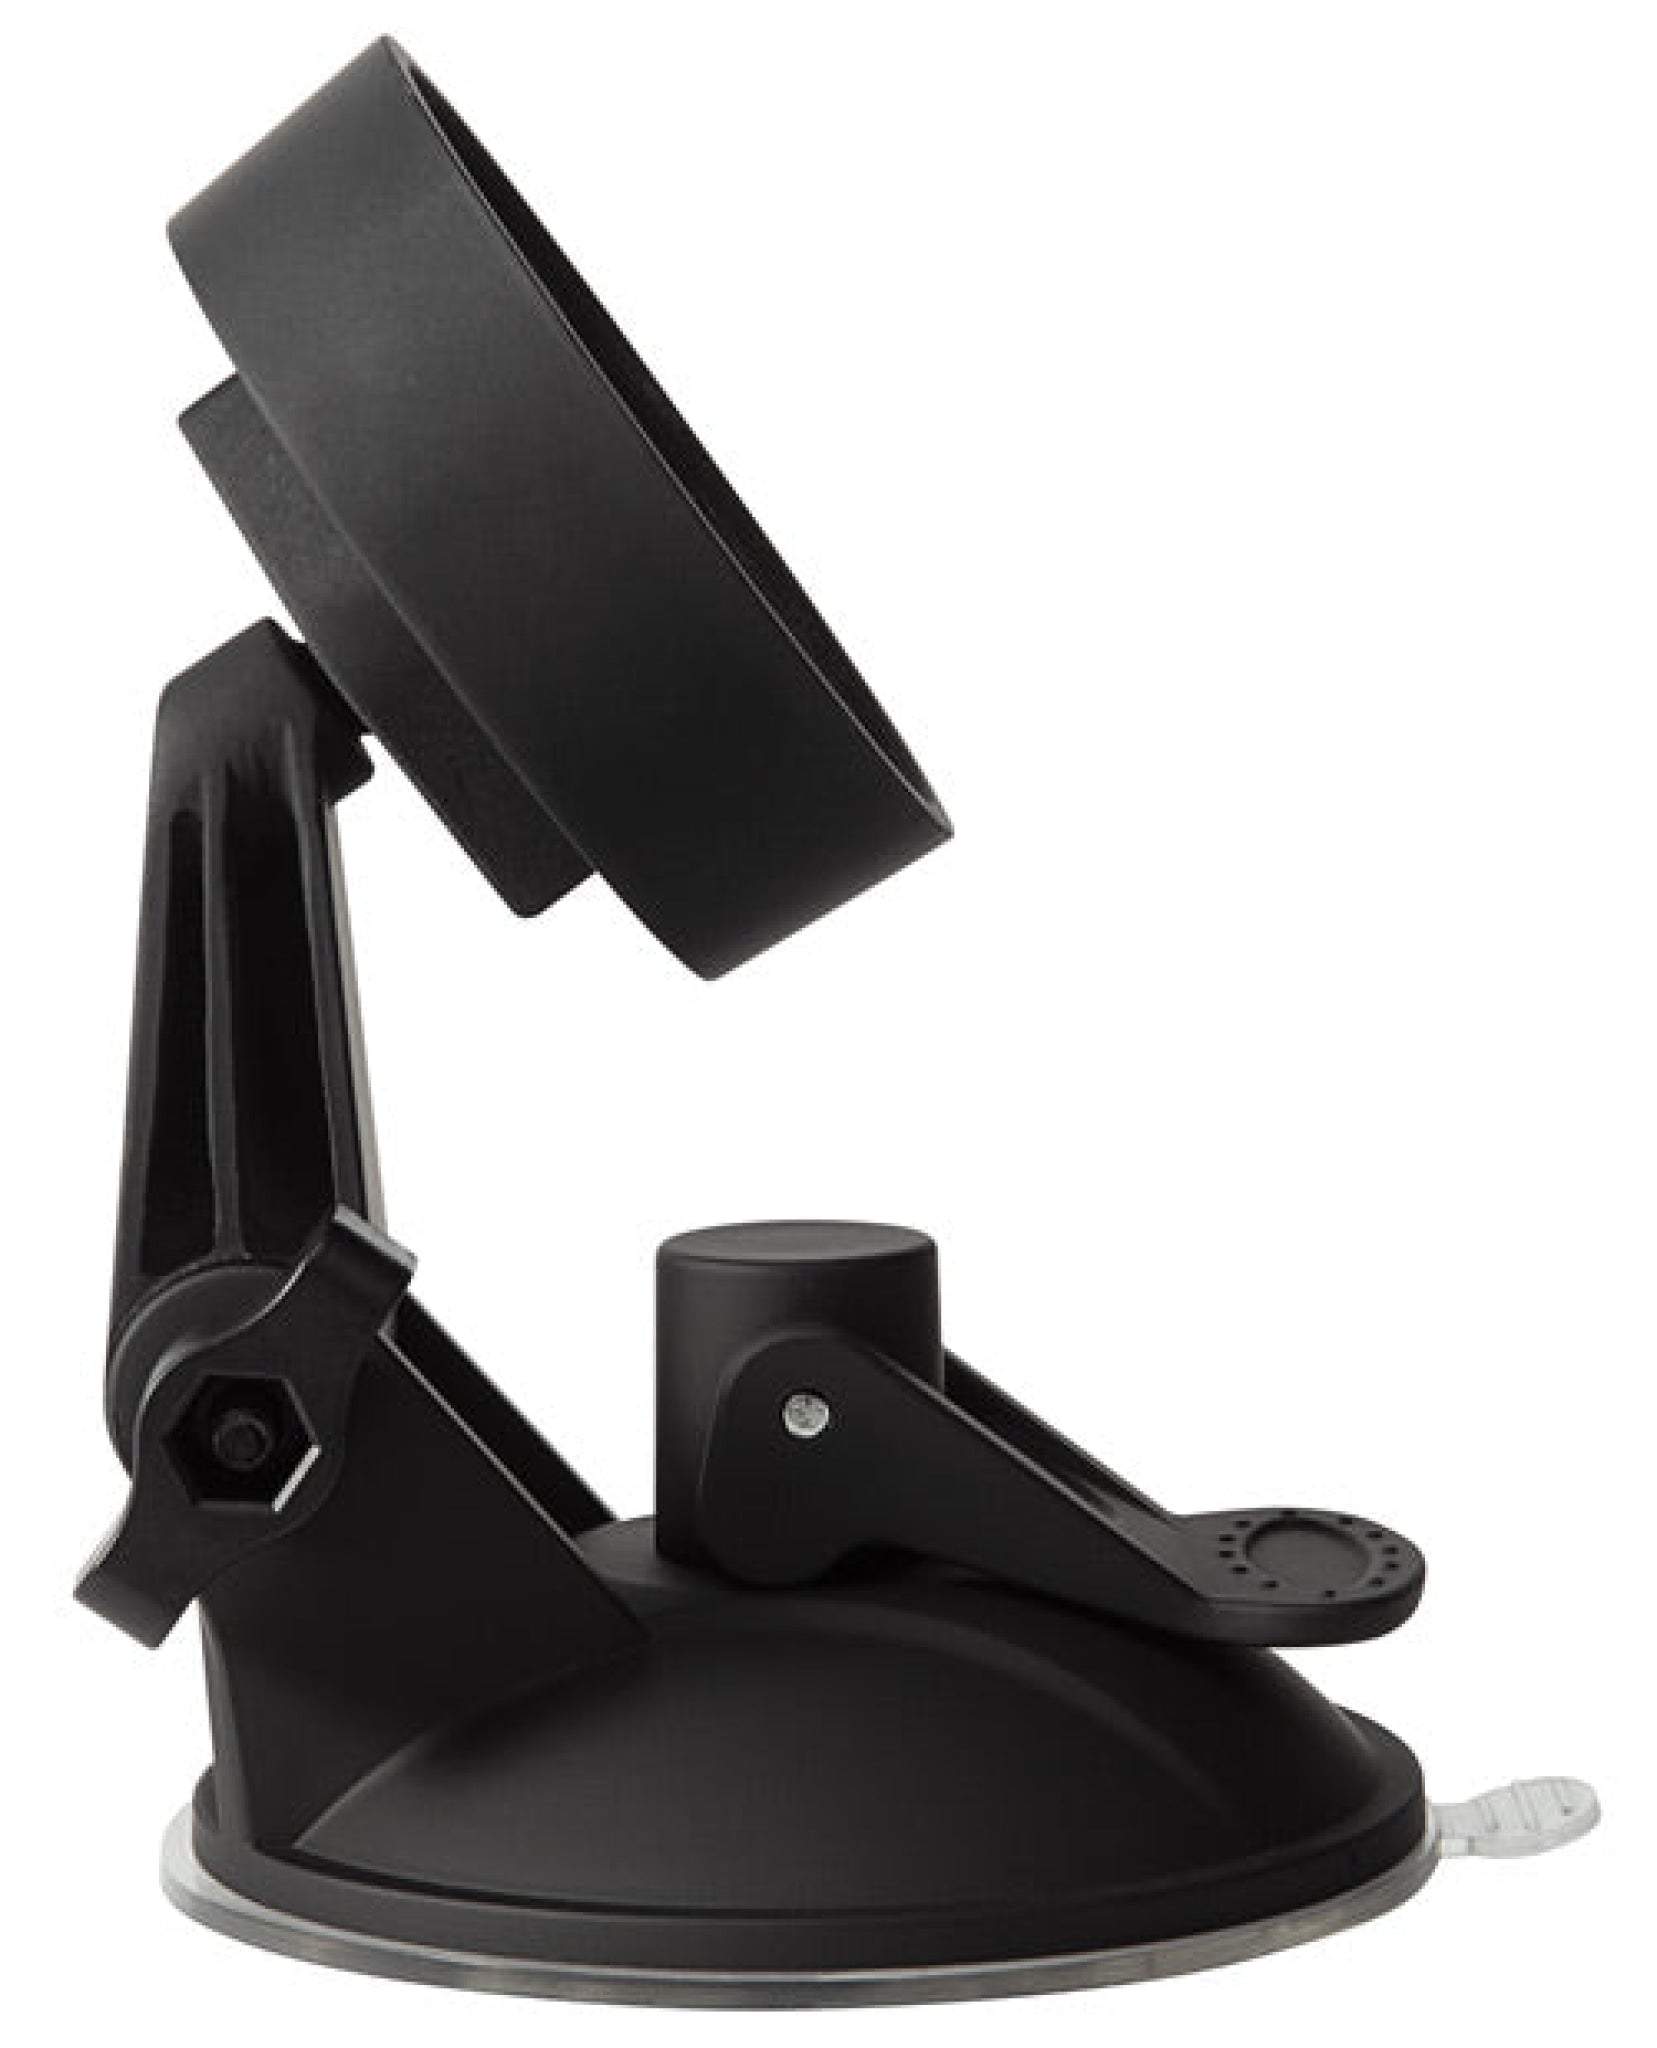 Main Squeeze Suction Cup Accessory - Black Doc Johnson